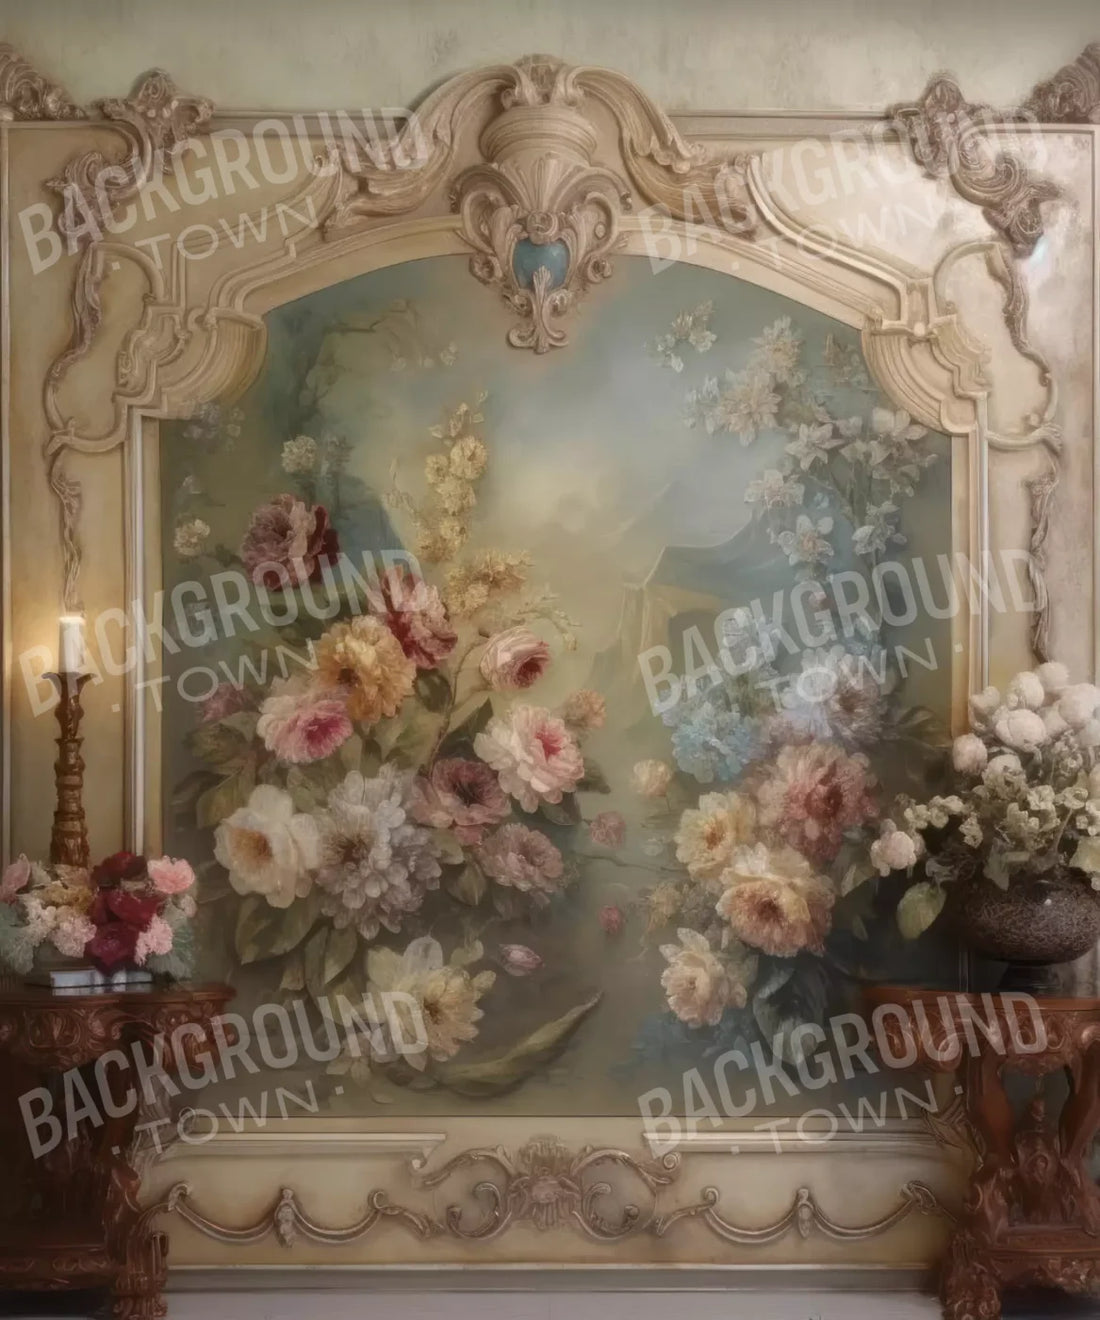 [flowers] [vintage[ [painting] Backdrop for Photography